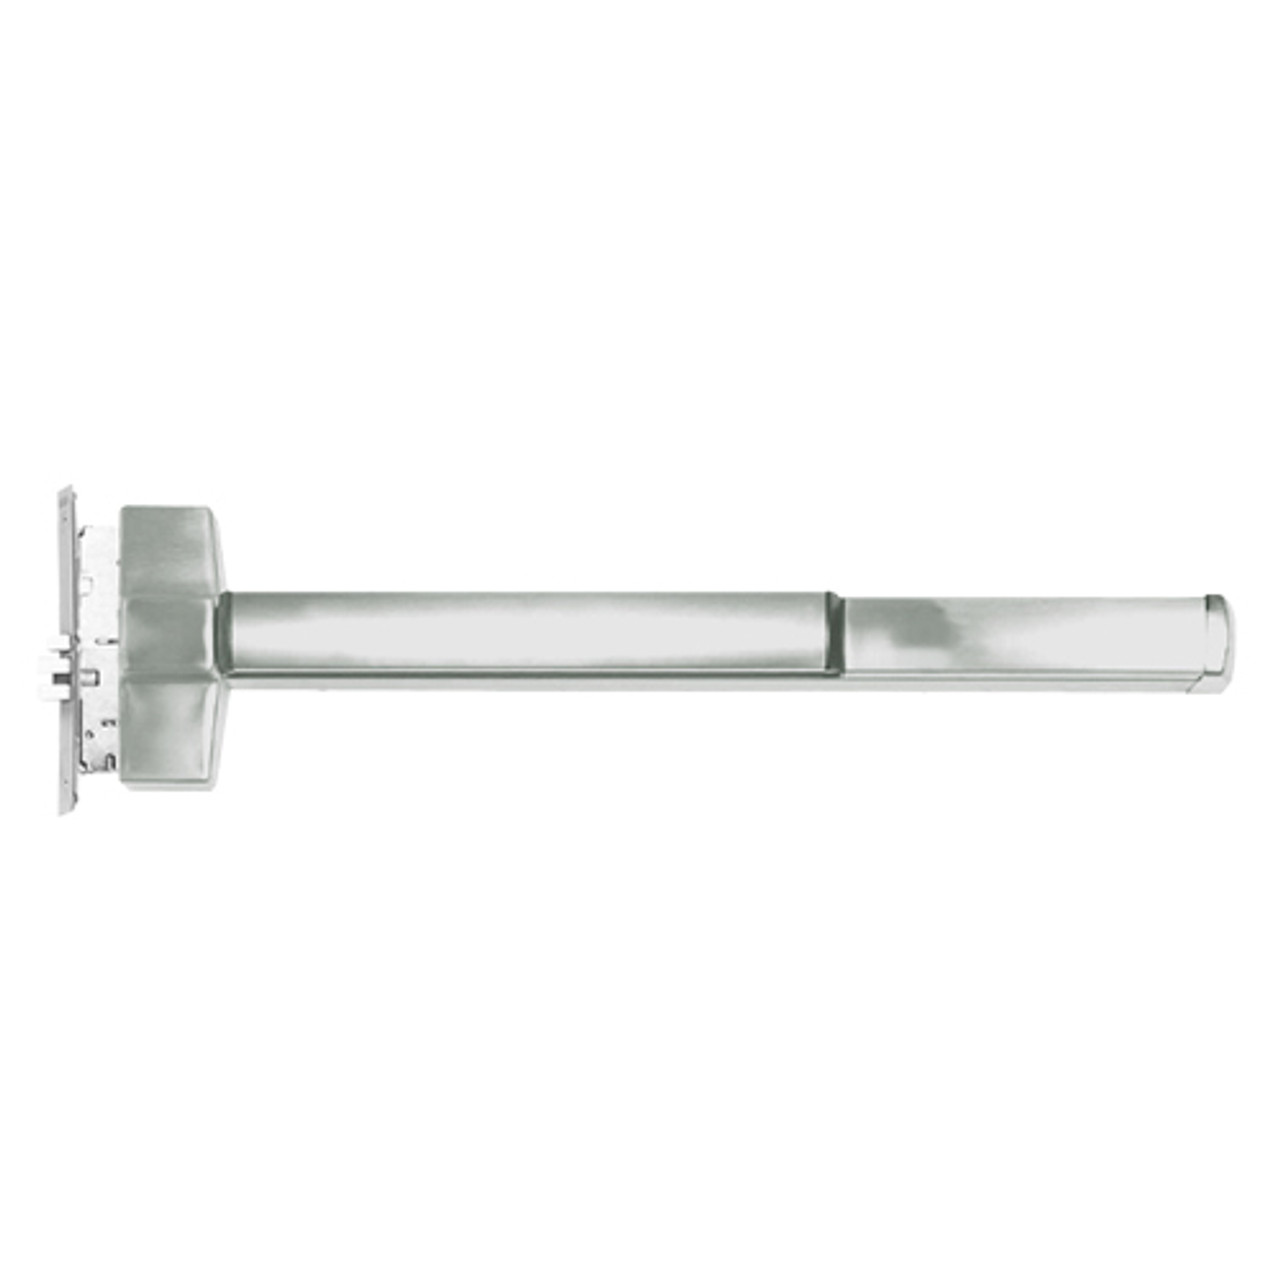 ED5600AL-619-M61-LHR Corbin ED5600 Series Fire Rated Mortise Exit Device with Exit Alarm Device in Satin Nickel Finish